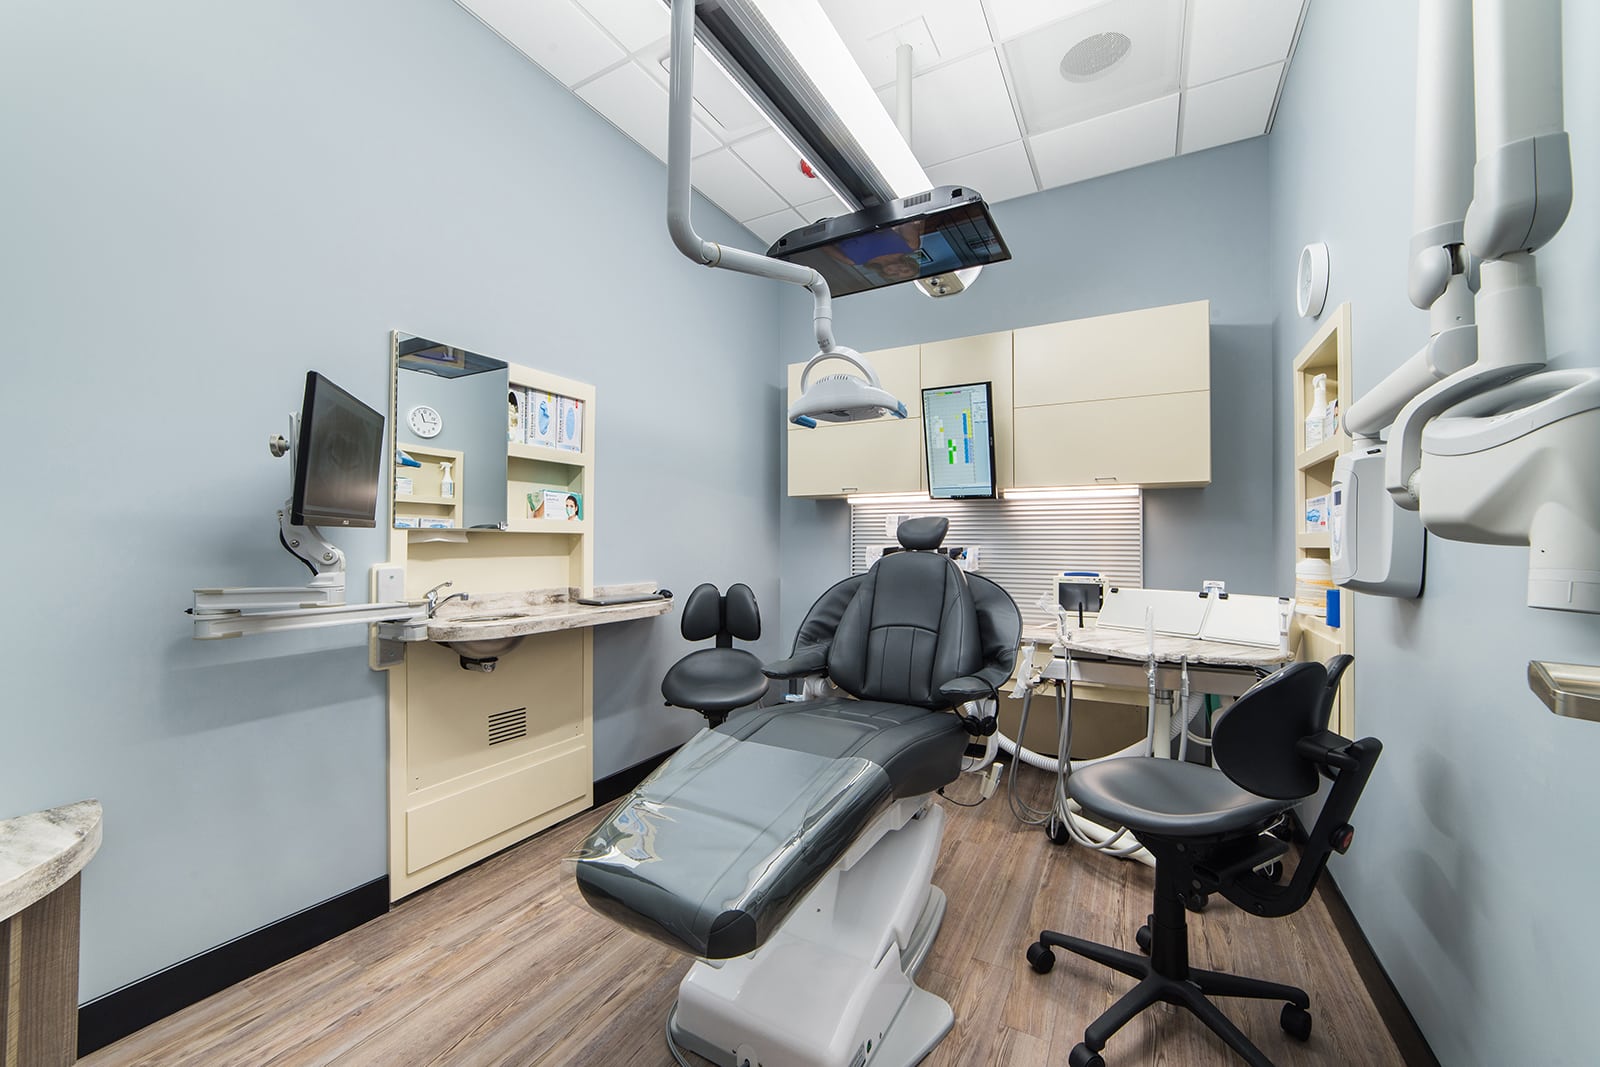 Dental office operatory with workstation and patient chair